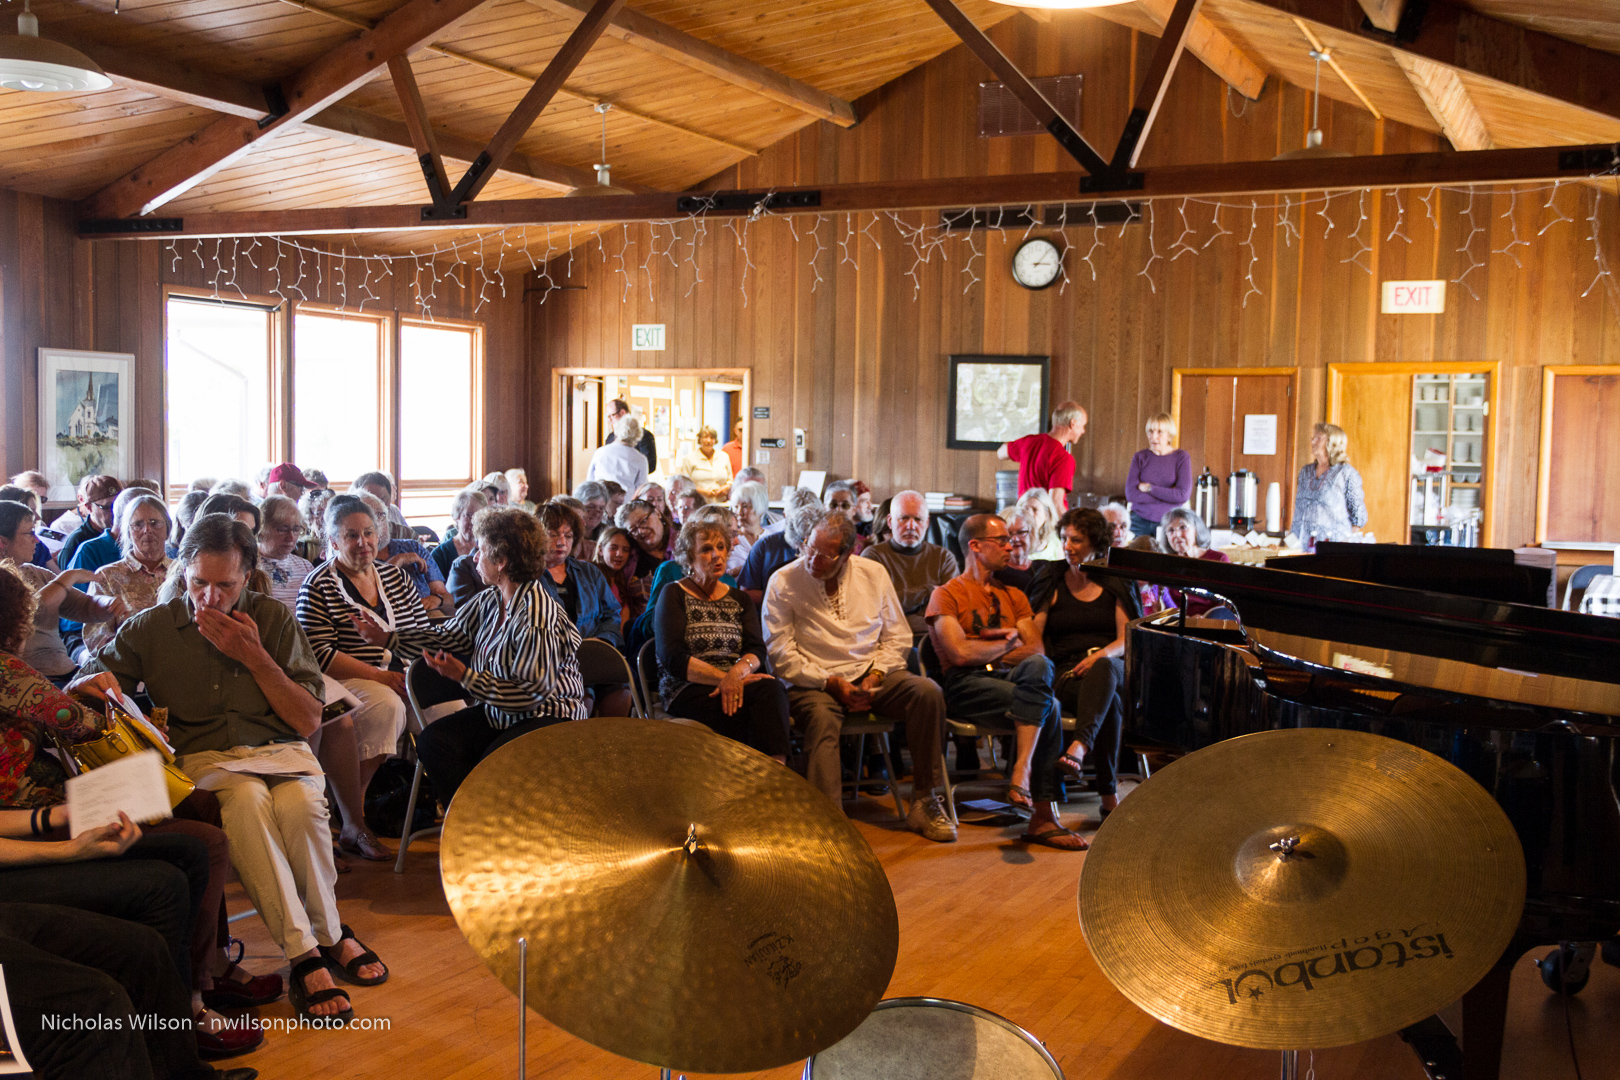 Preston Hall was the venue for the Young Musicians Choral Orchestra concert during the Mendocino Music Festival 2015.